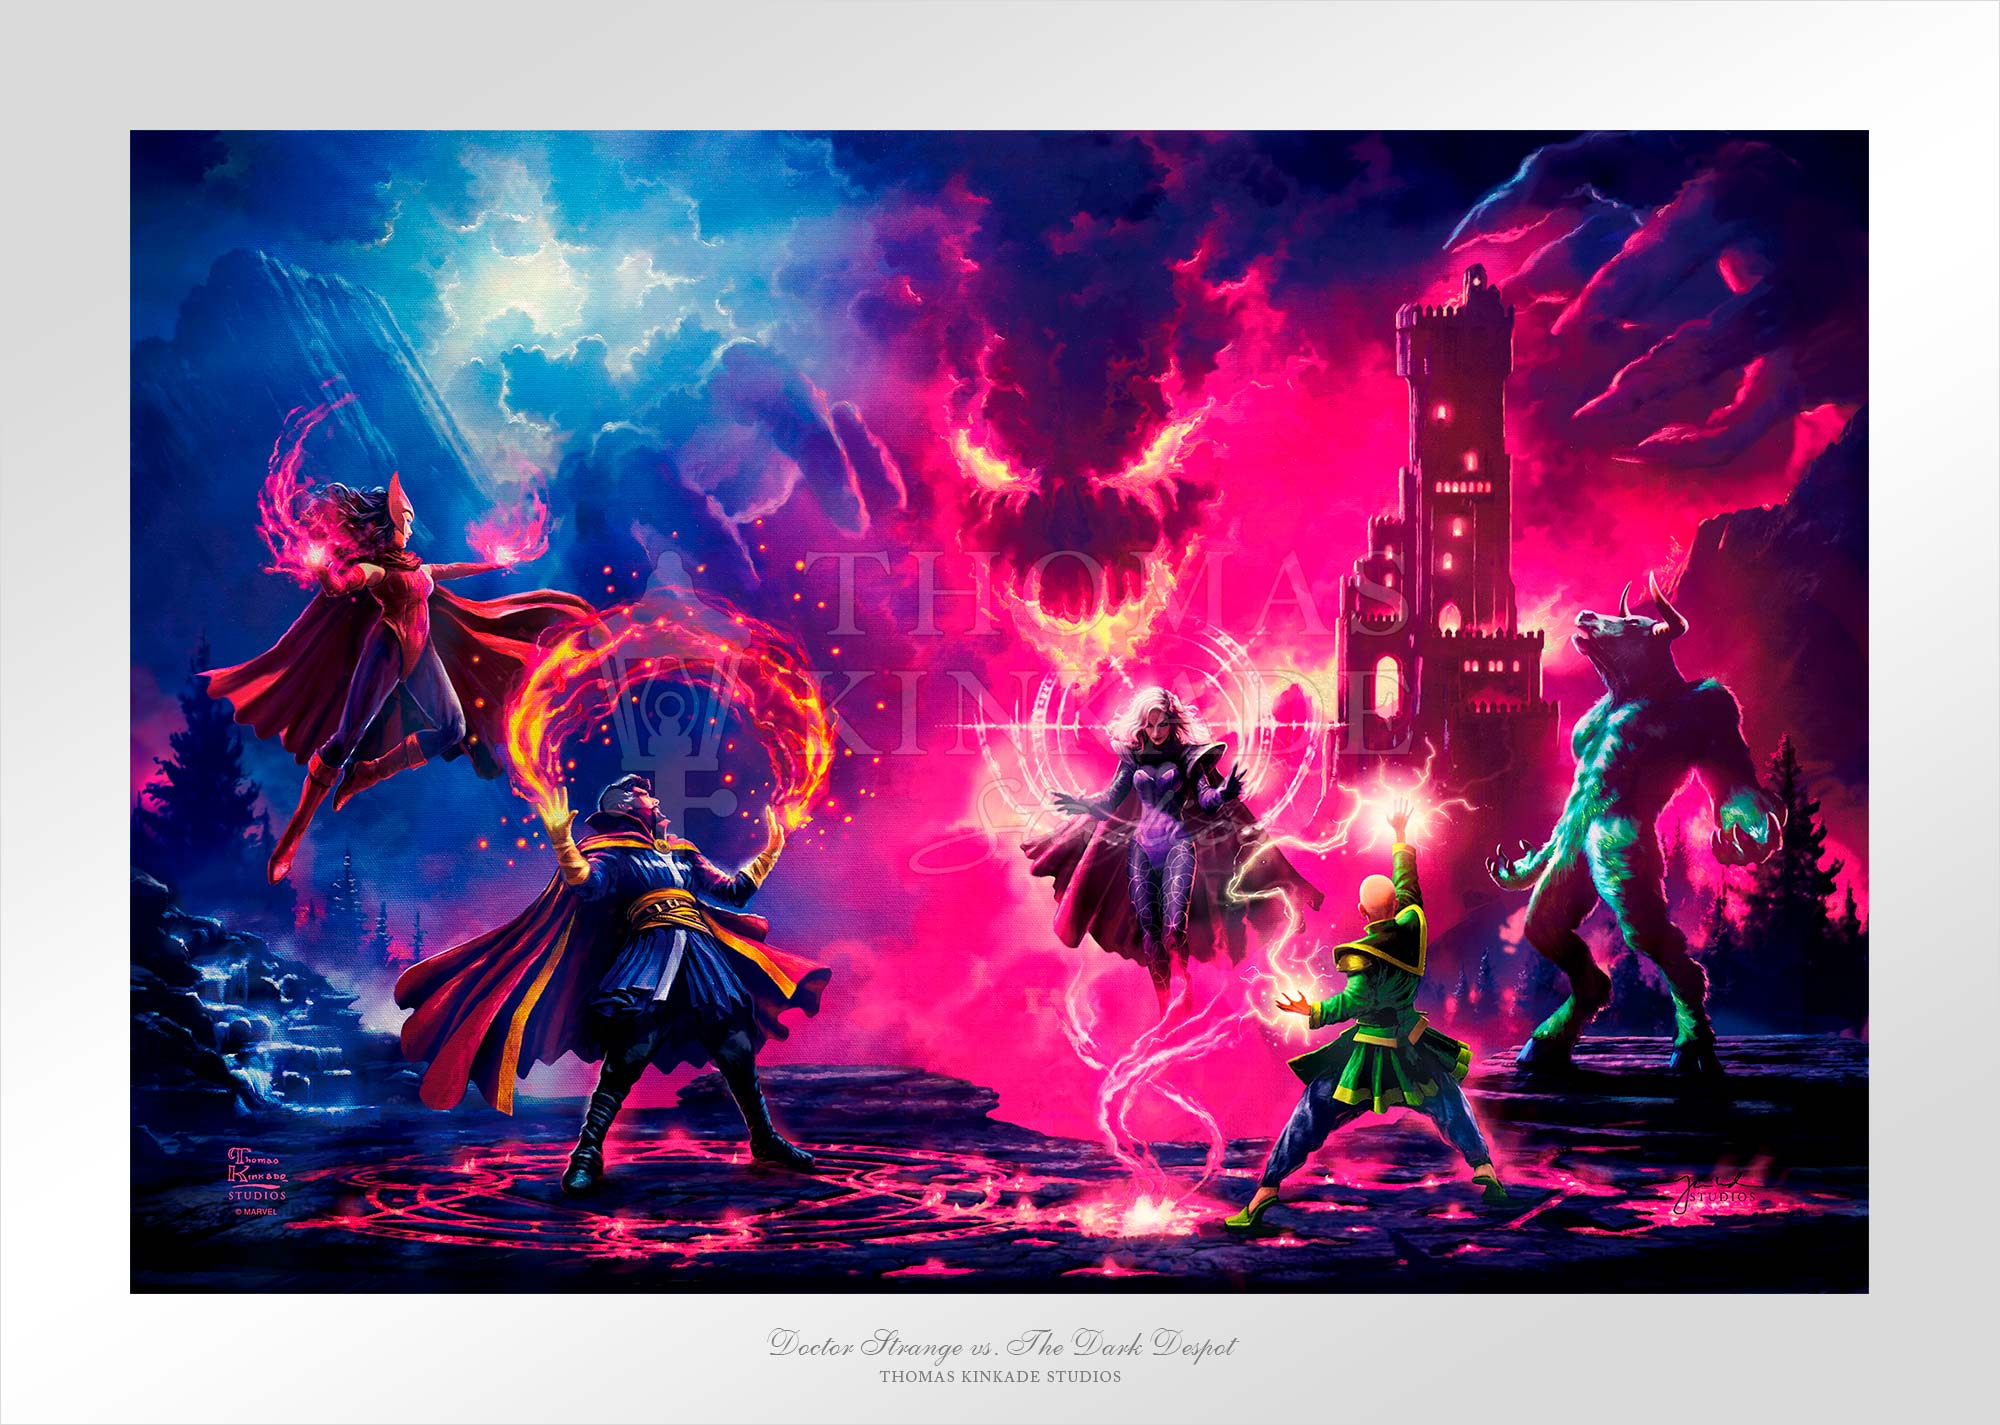 Doctor Strange vs. The Dark Despot By Thomas Kinkade Studios.  Doctor Strange and the Dark Despot, Dormammu. Scarlet Witch, the mistress of “Hex Power”, Rintrah and Wong have entered the skirmish to join forces with Doctor Strange against the immortal energy of Dormammu. - Unframed